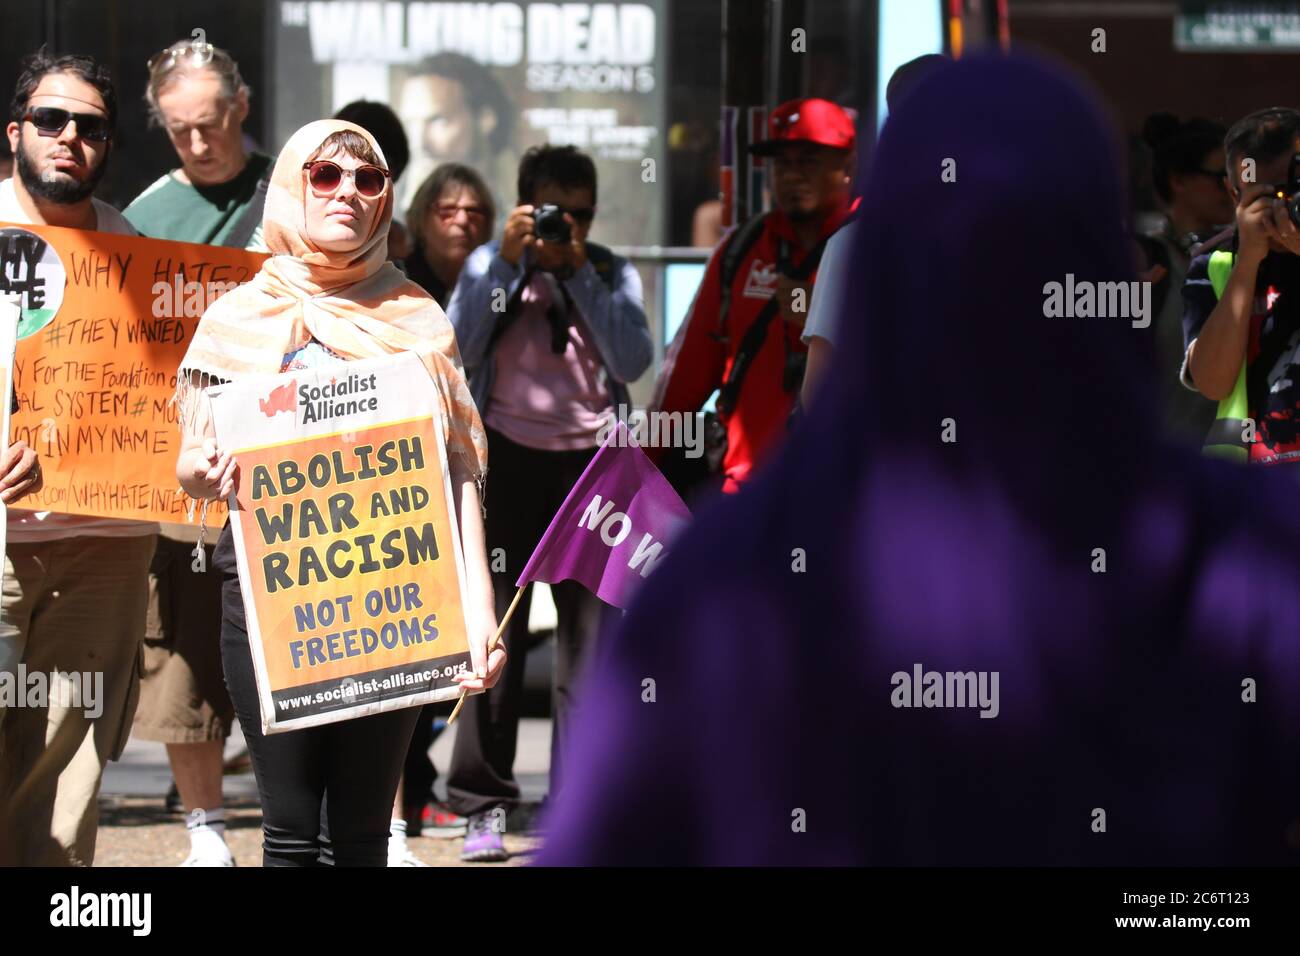 Lydia who appeared on SBS’s ‘Living with the Enemy’ speaks at the rally against ‘Islamophobia’ outside Sydney Town Hall as protesters hold signs. Stock Photo